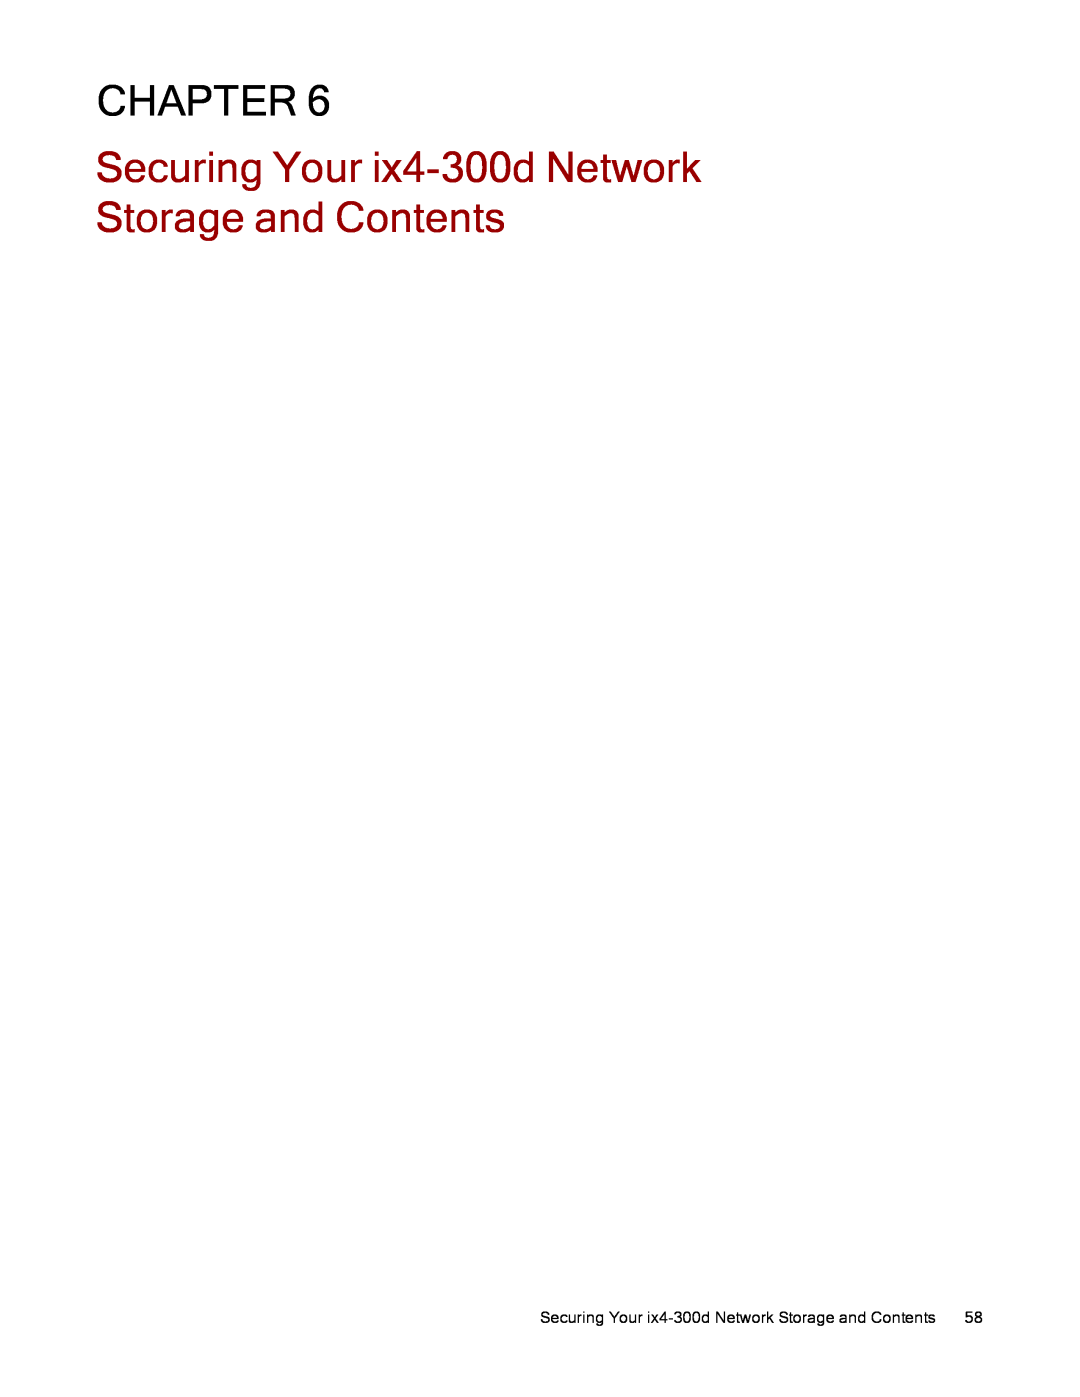 Lenovo 70B89000NA, 70B89003NA, 70B89001NA manual Securing Your ix4-300d Network Storage and Contents, Chapter 